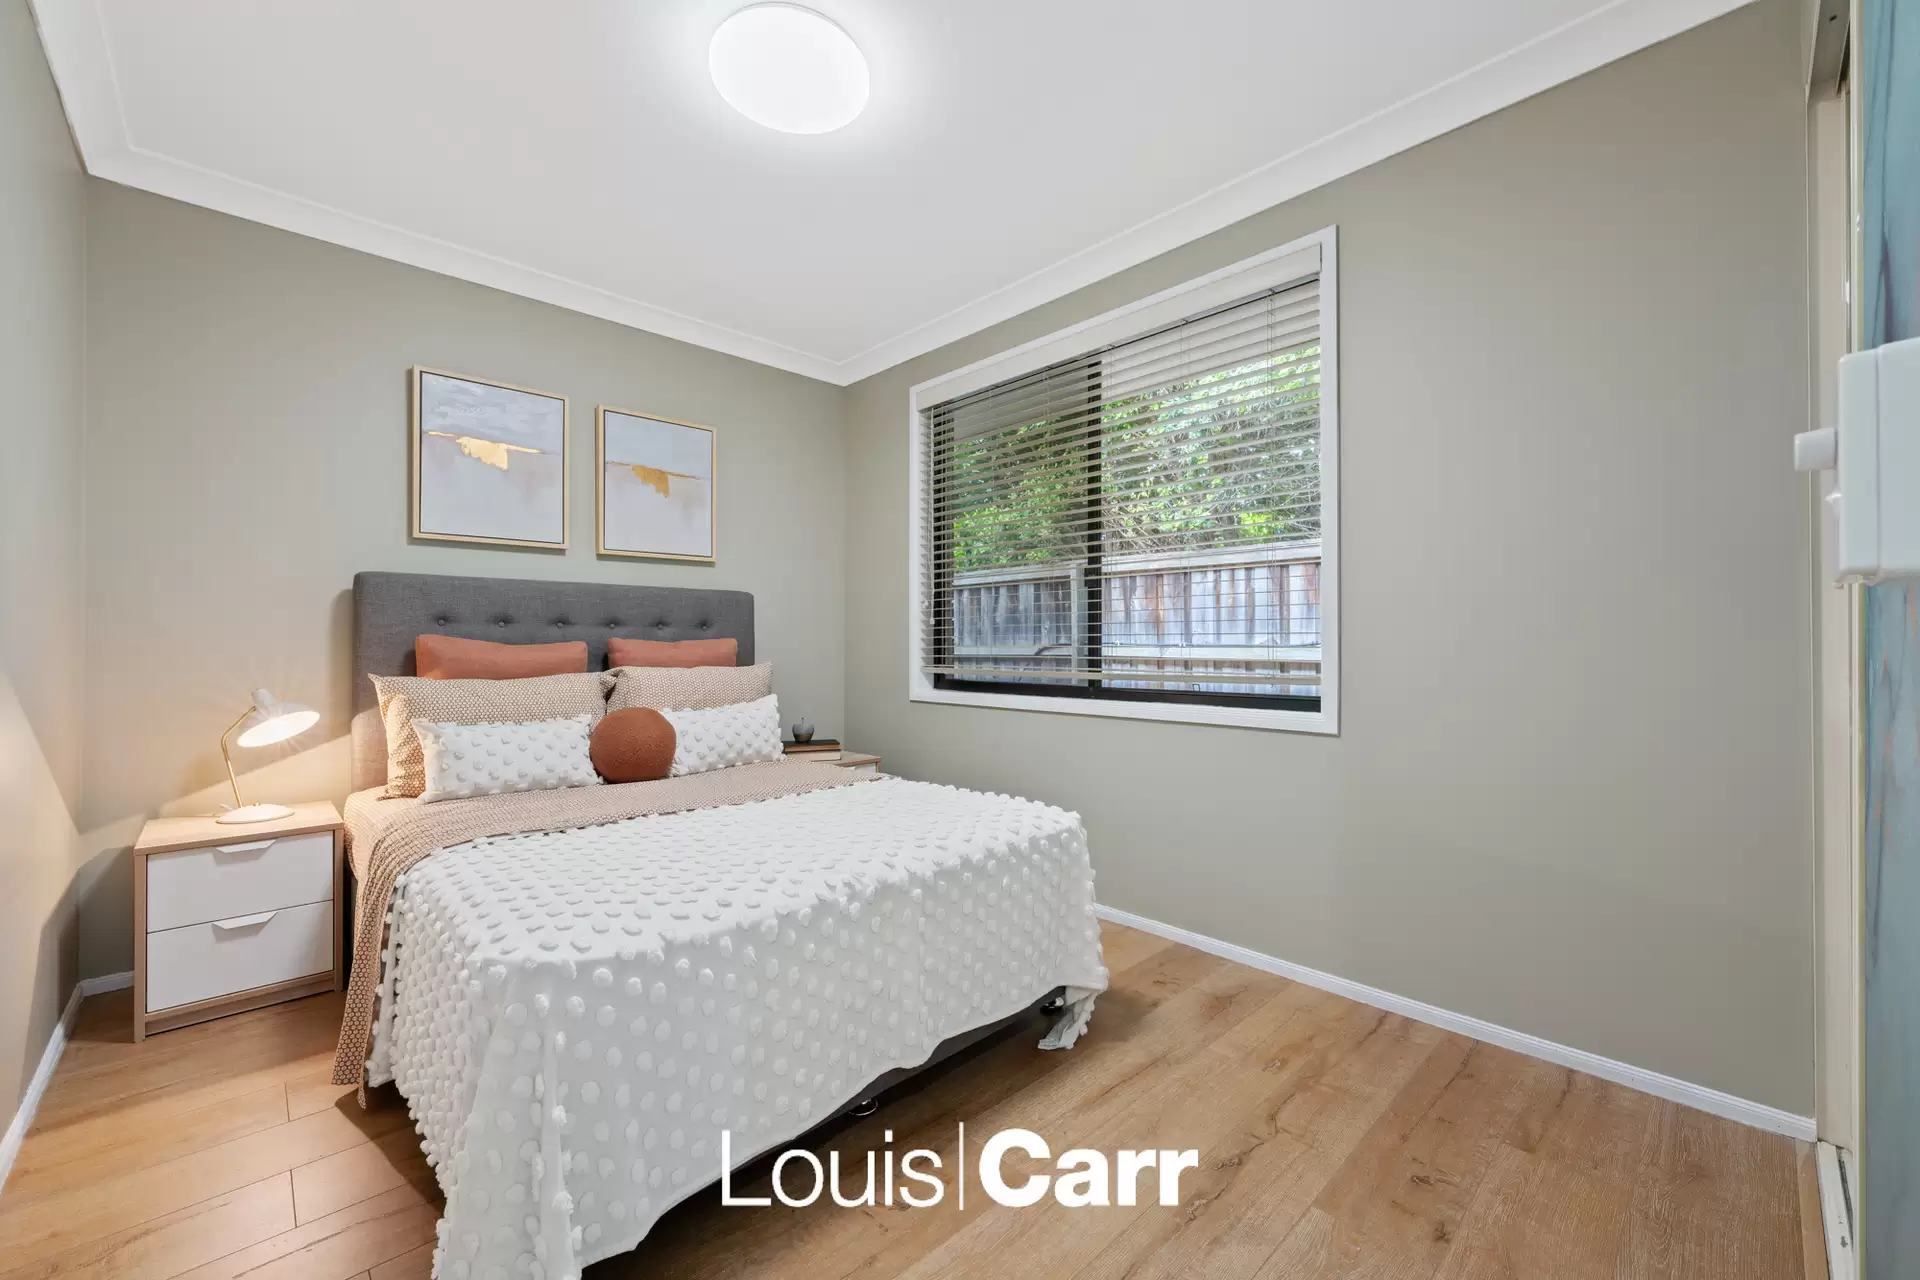 Photo #16: 33 Marsden Avenue, Kellyville - For Sale by Louis Carr Real Estate